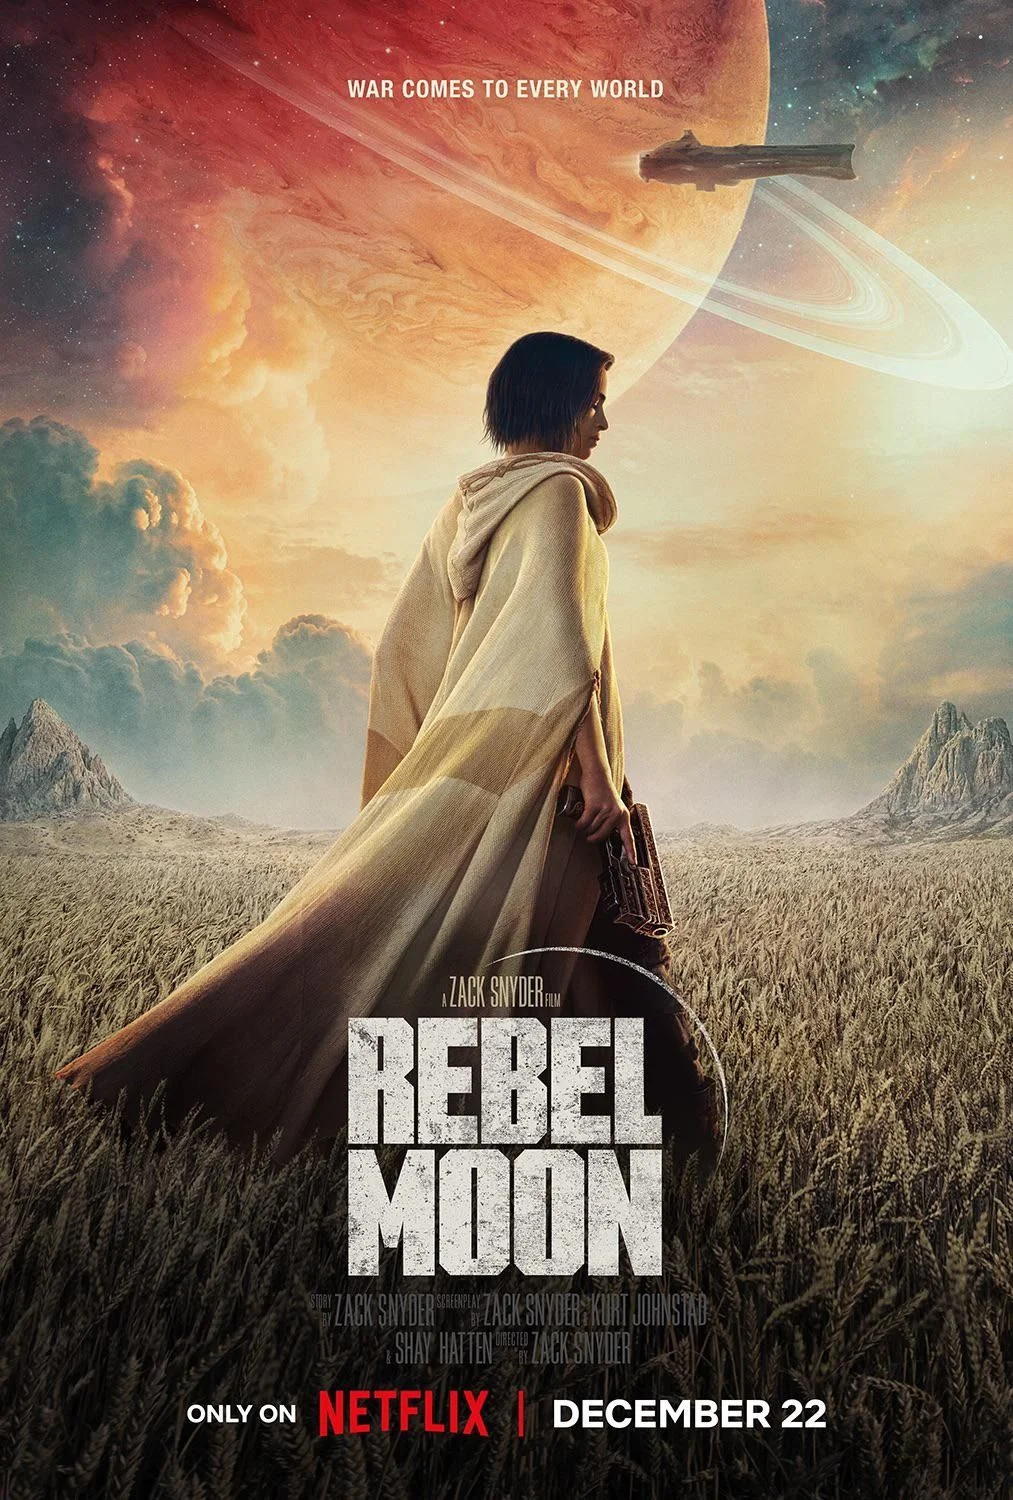 Dissecting Snyder's Vision: The Debate Over Rebel Moon's Director's Cut